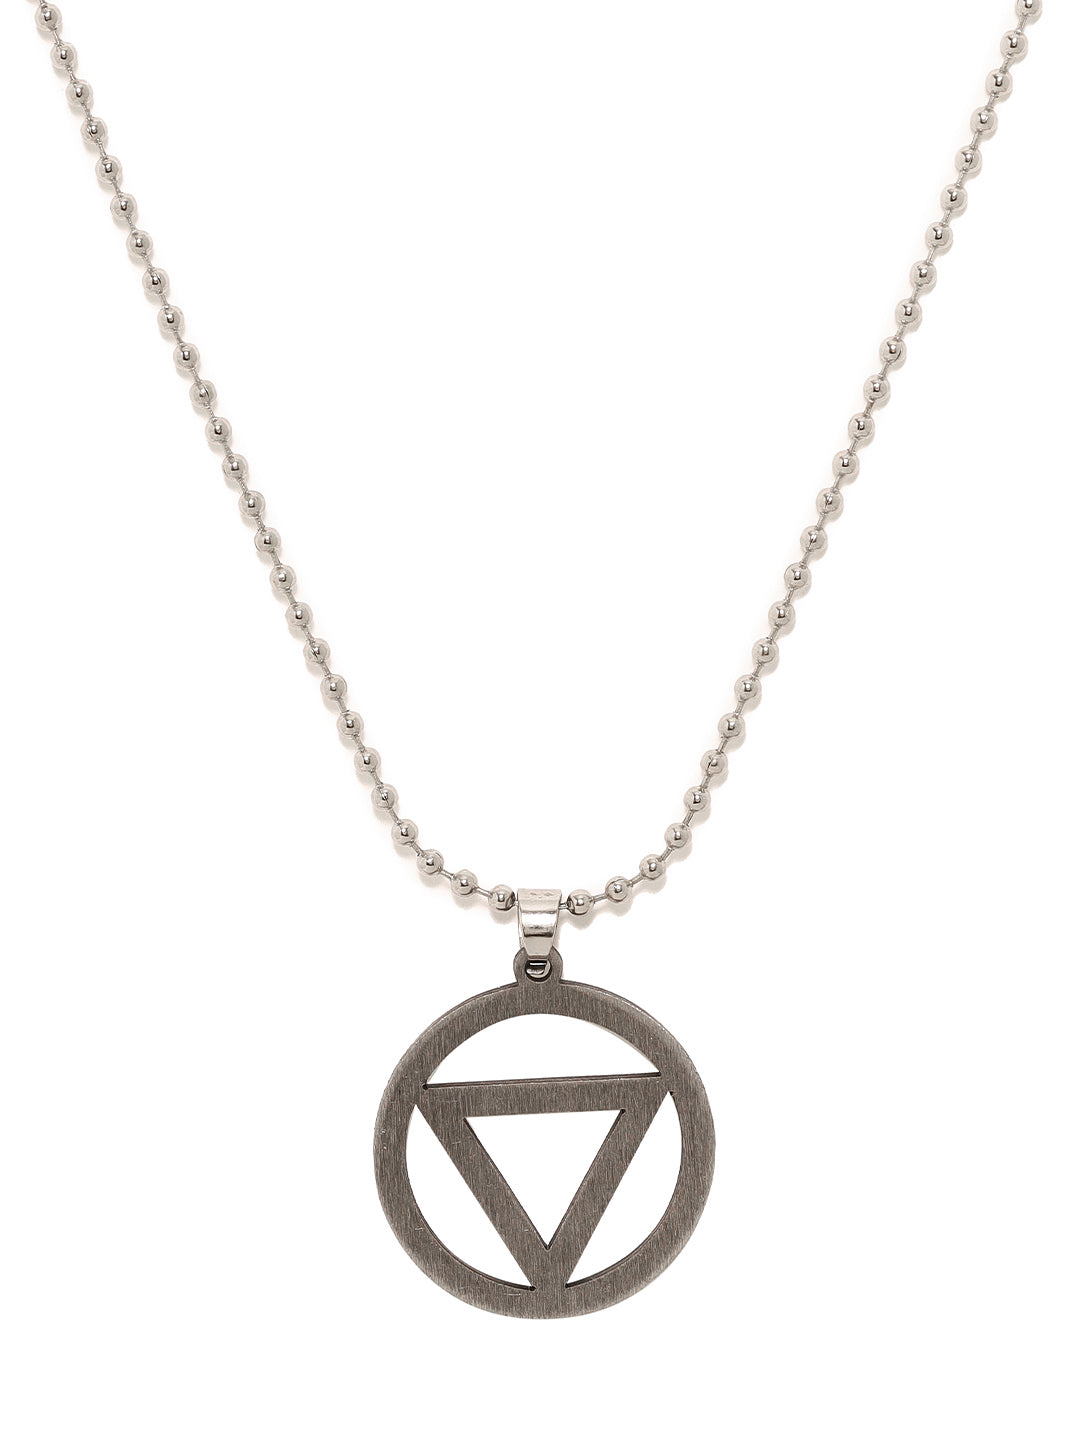 Bold by Priyaasi A Silver Plated Triangle shape Pendant on Chain